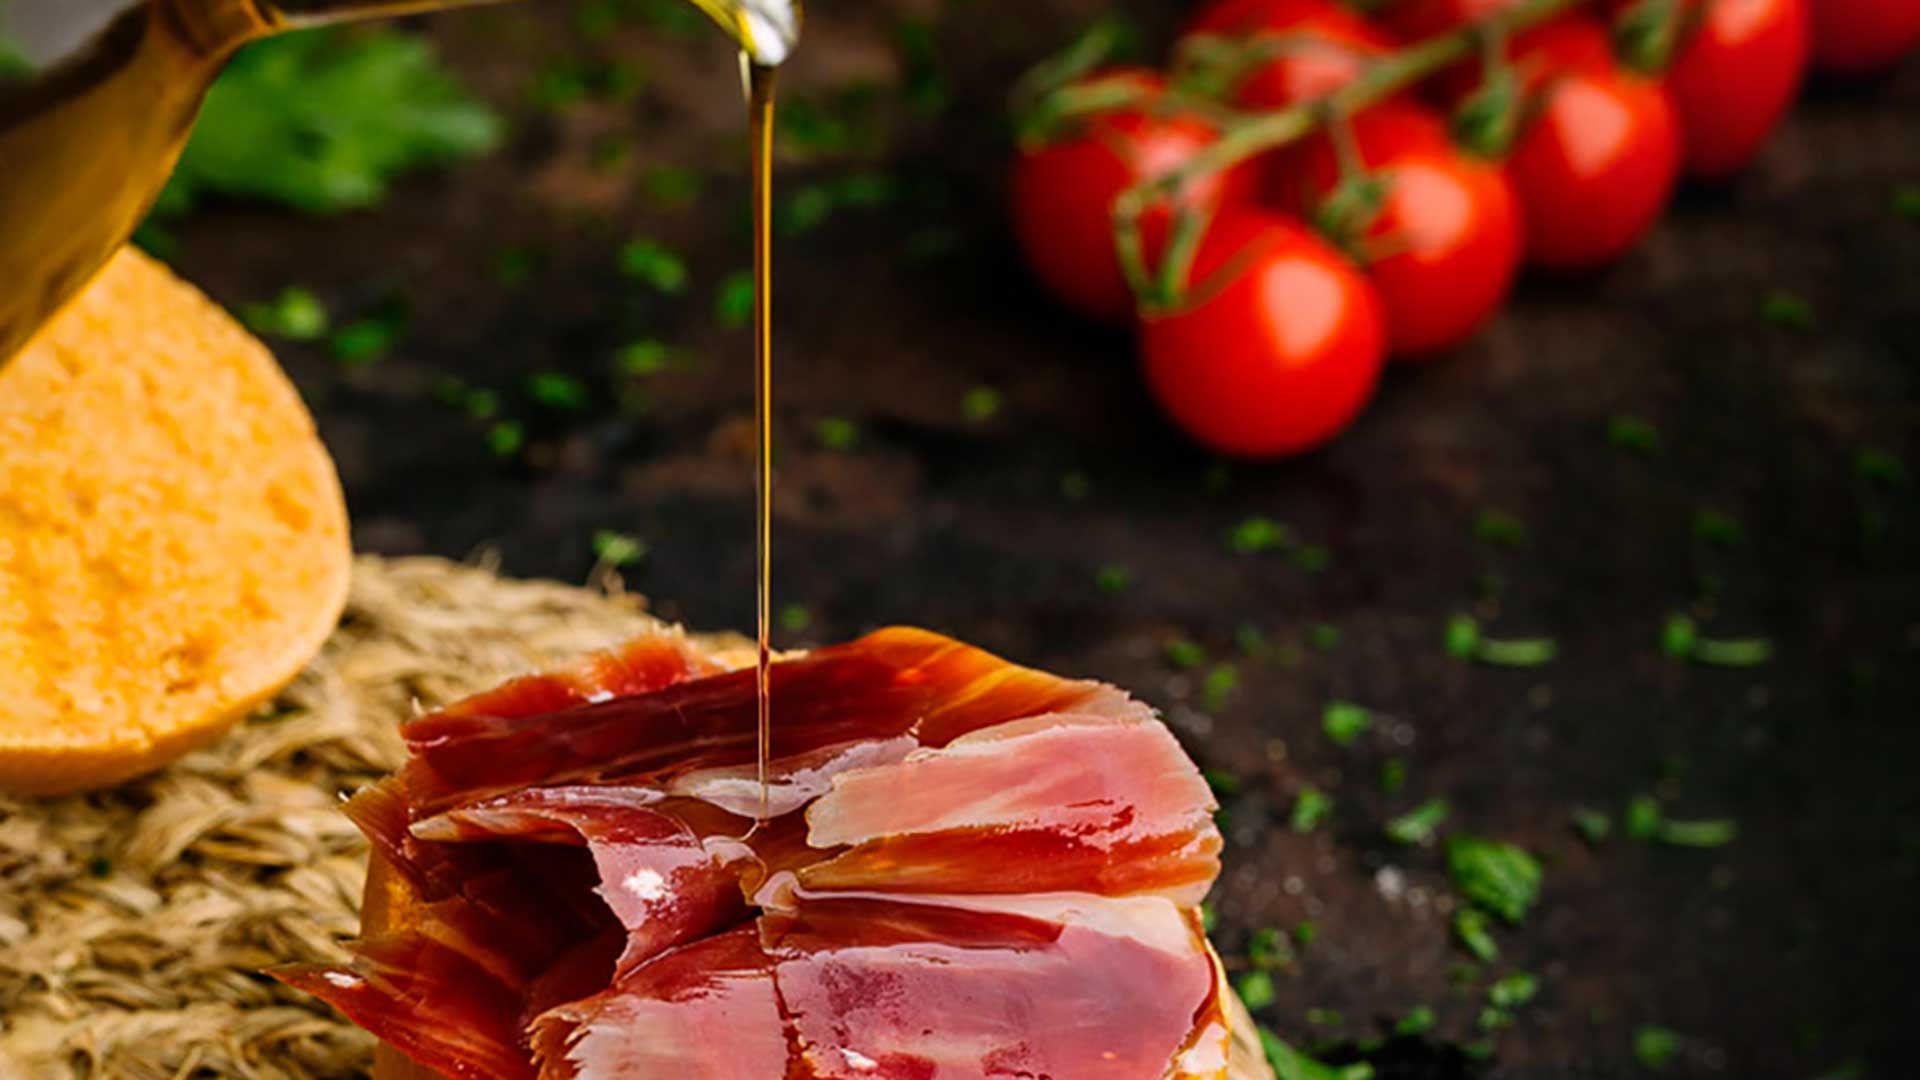 Slice of homemade bread with tomato, ibérico ham, and olive oil from Aragón